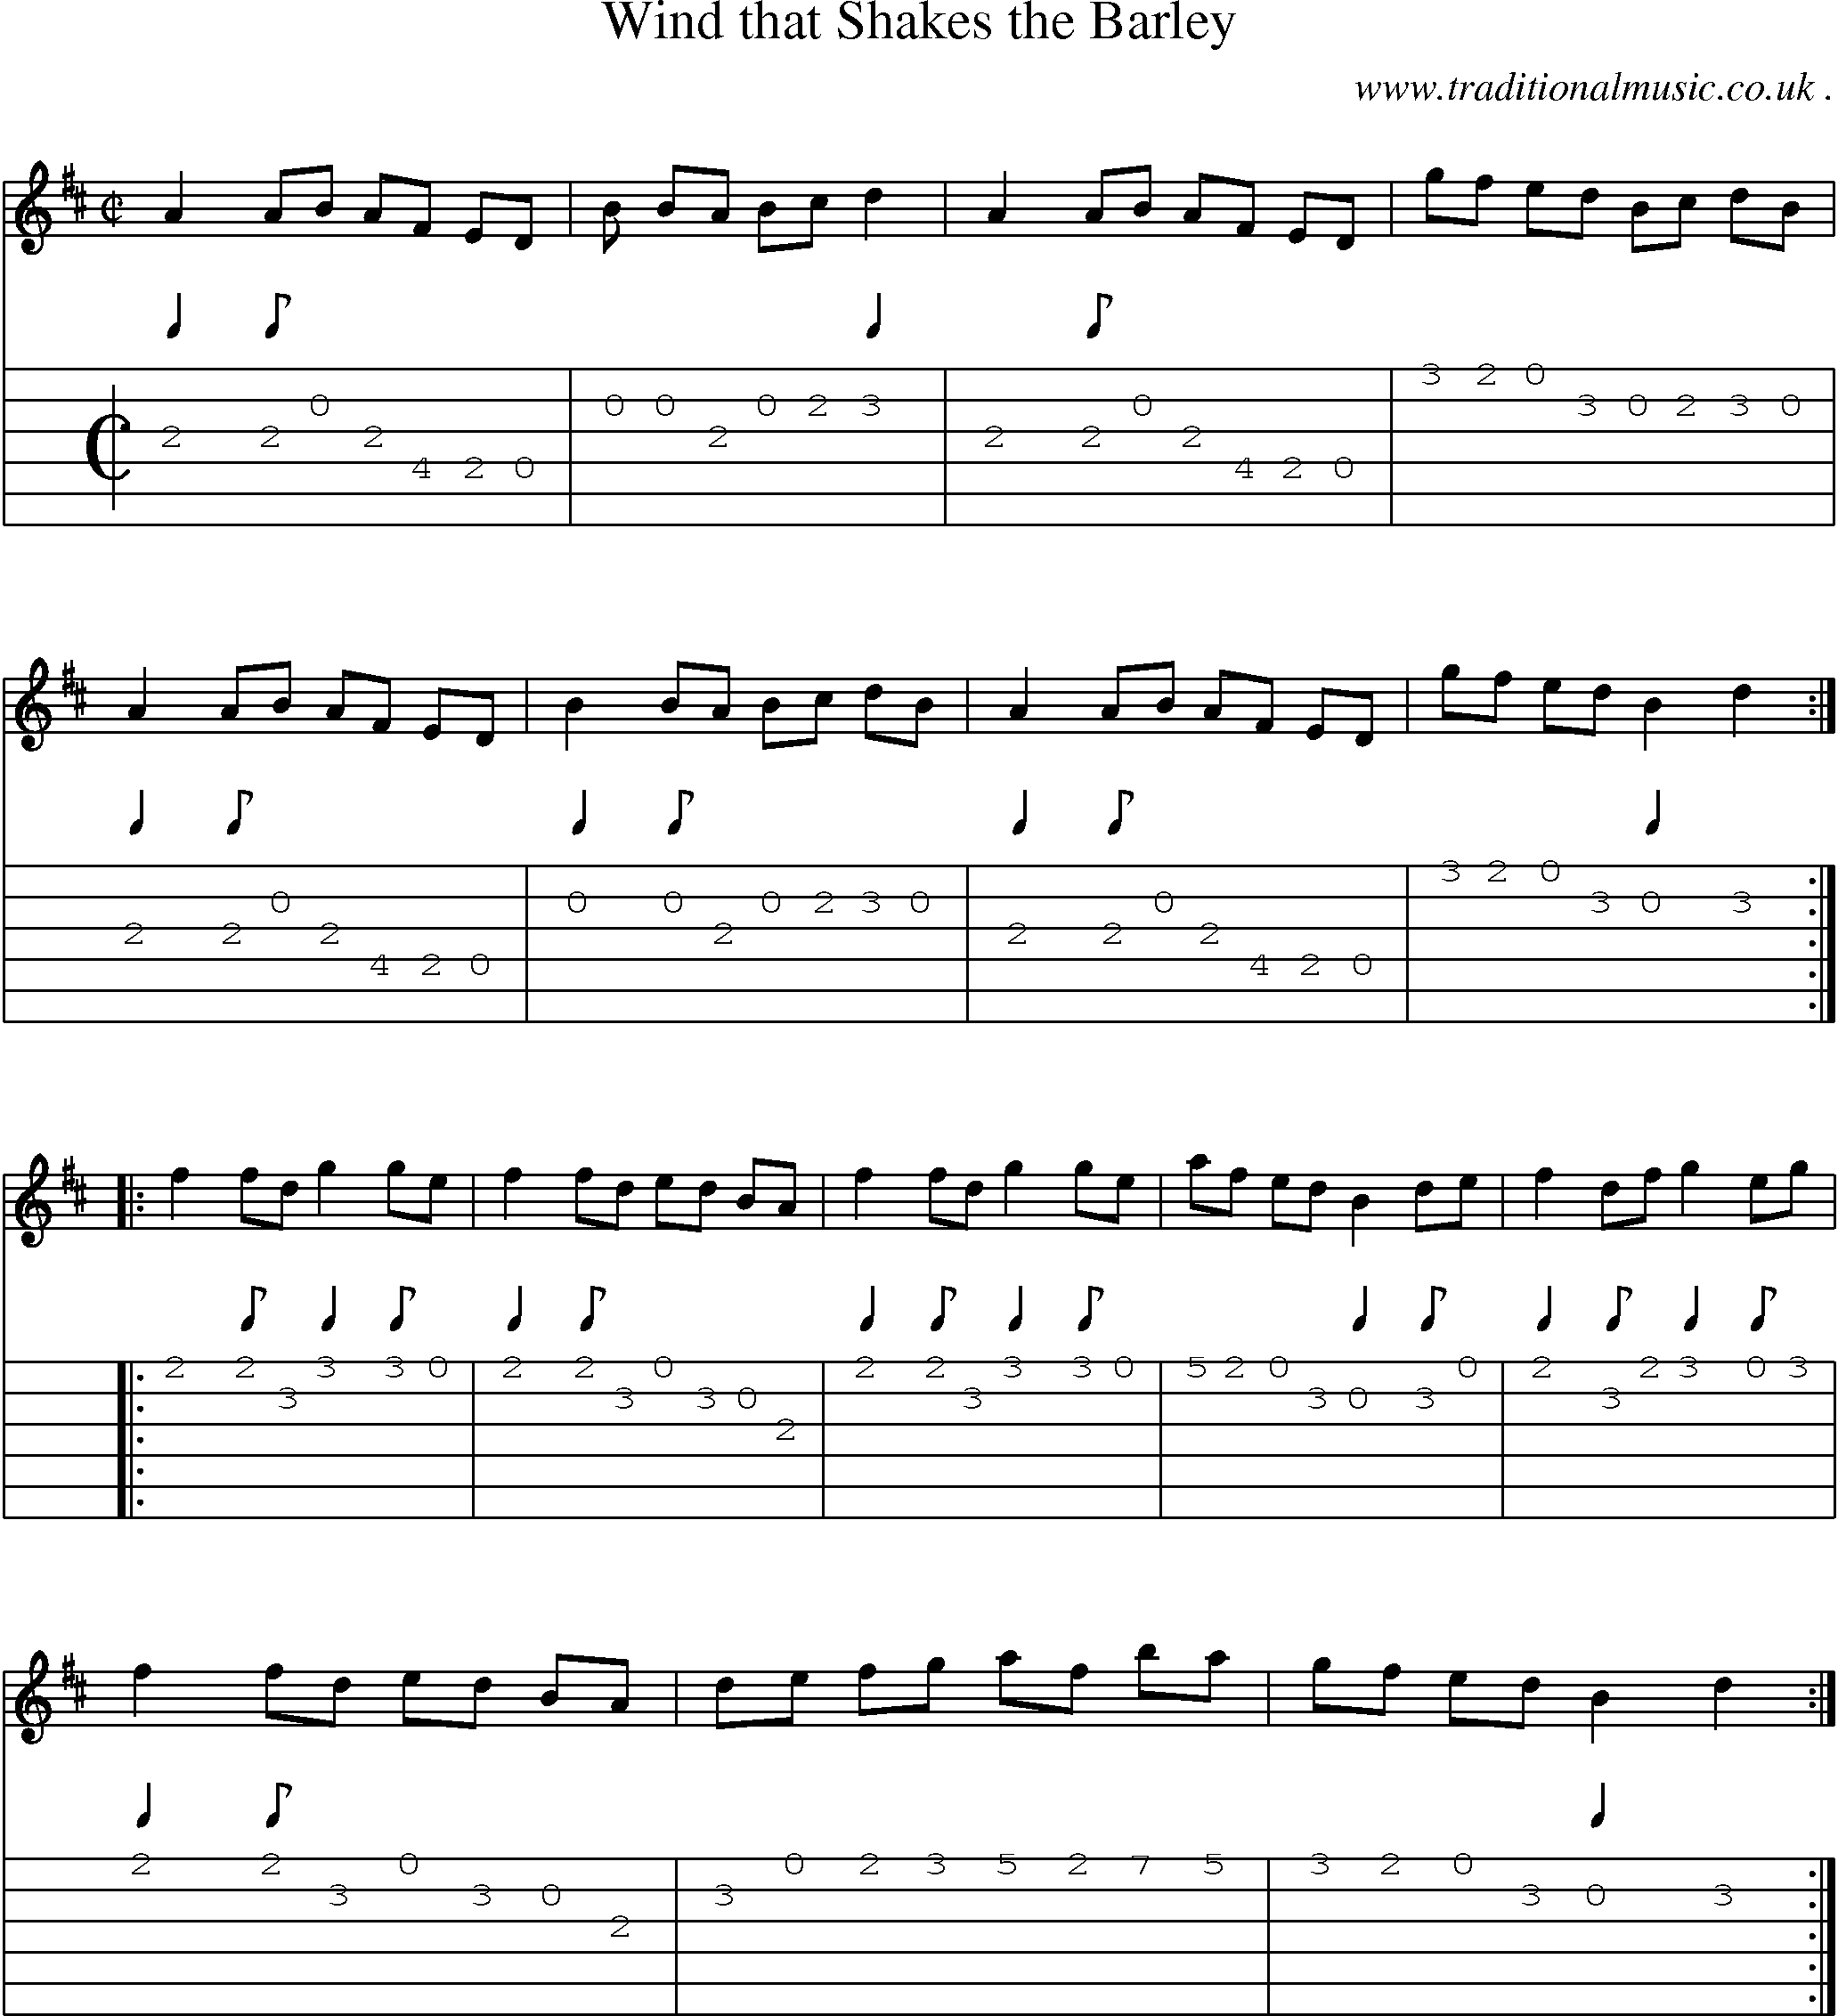 Sheet-music  score, Chords and Guitar Tabs for Wind That Shakes The Barley